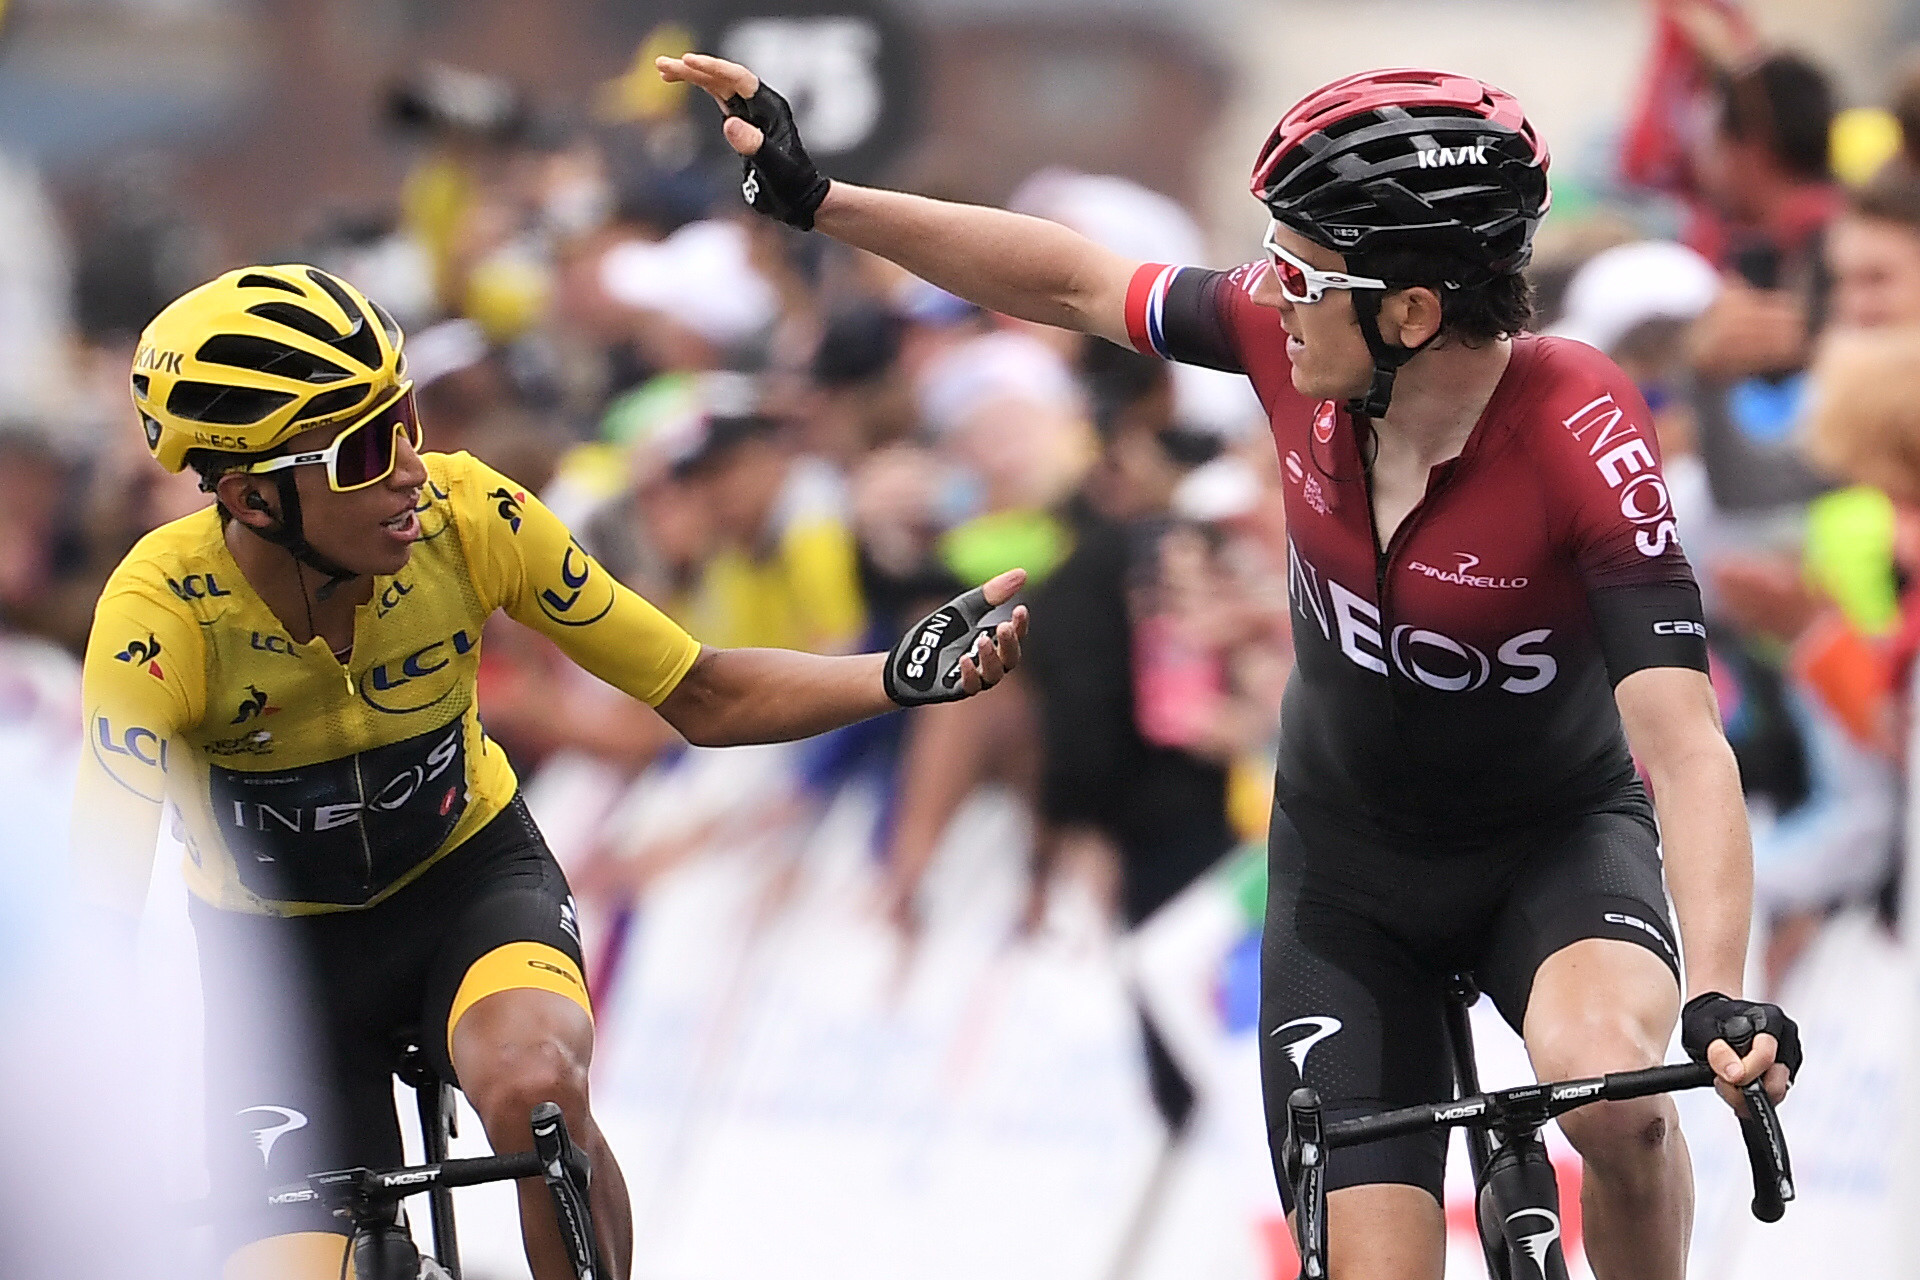 Egan Bernal of Team Ineos is set to become the first Colombian winner of the Tour de France ©Getty Images